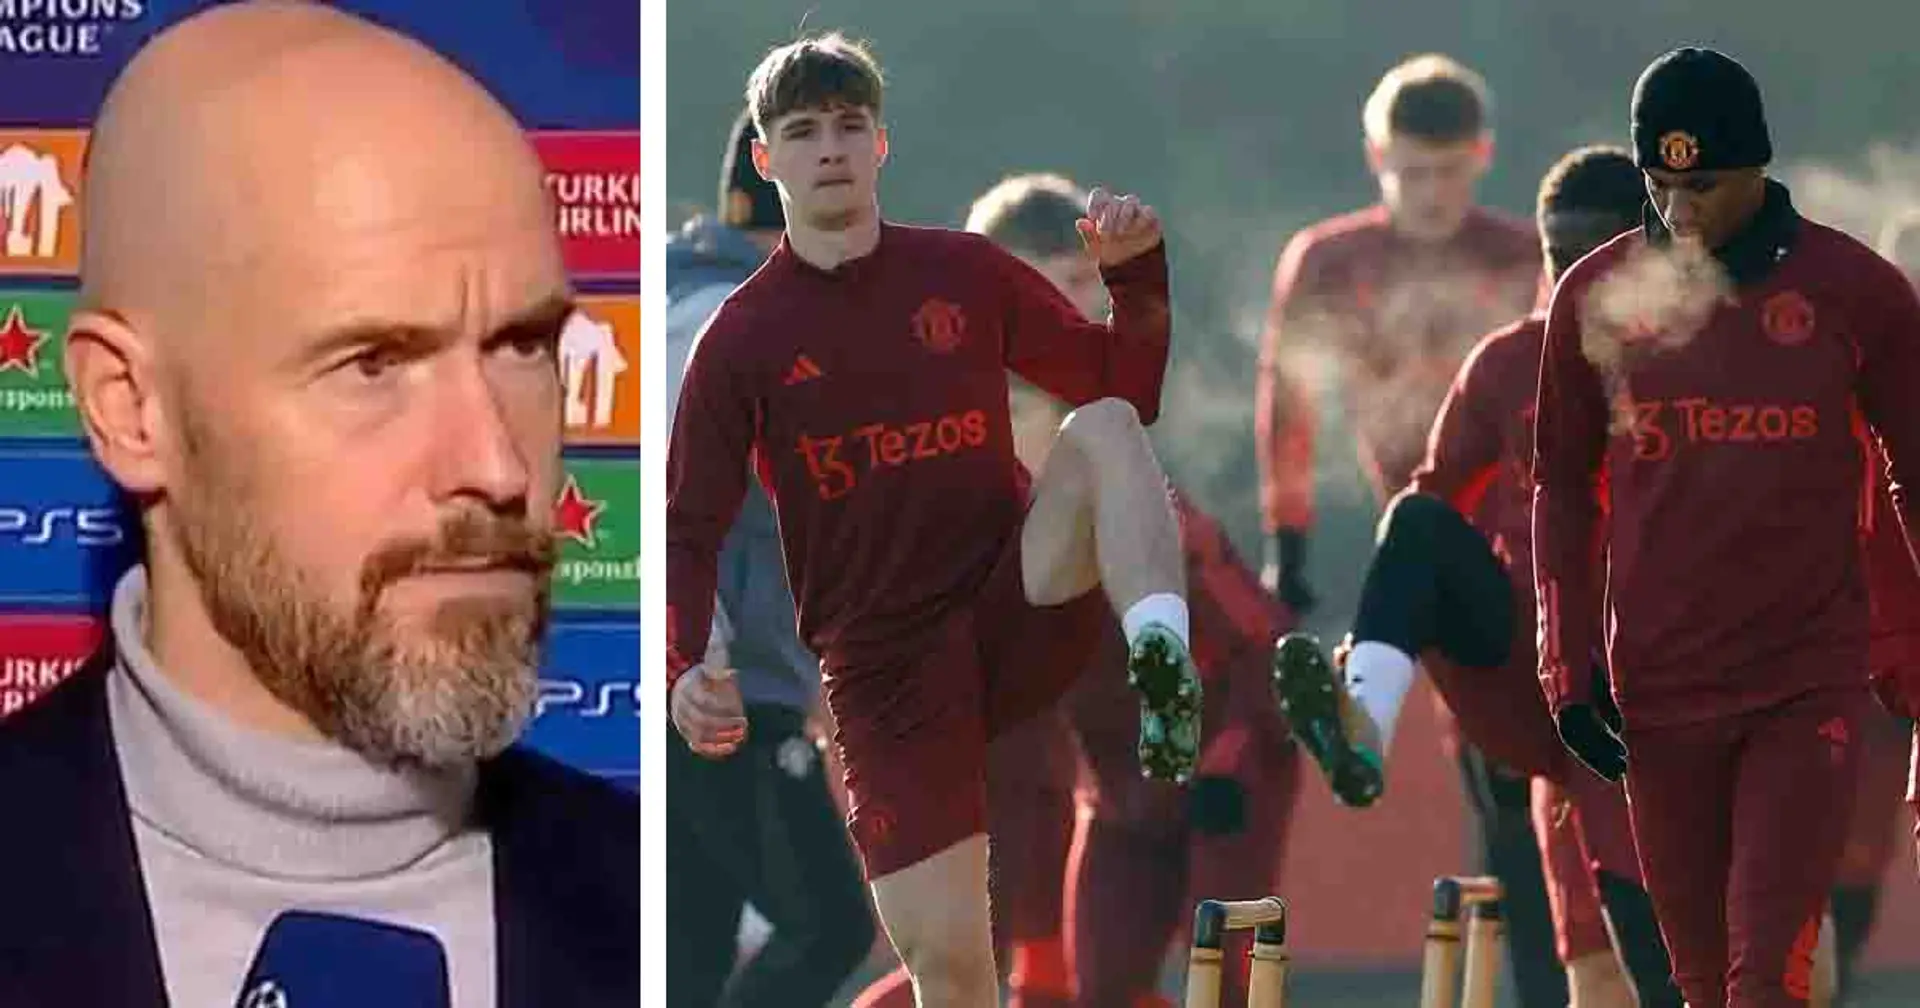 'He's been wowed': Ten Hag aiming to fast-track one Man United legend's son’s path to first-team squad